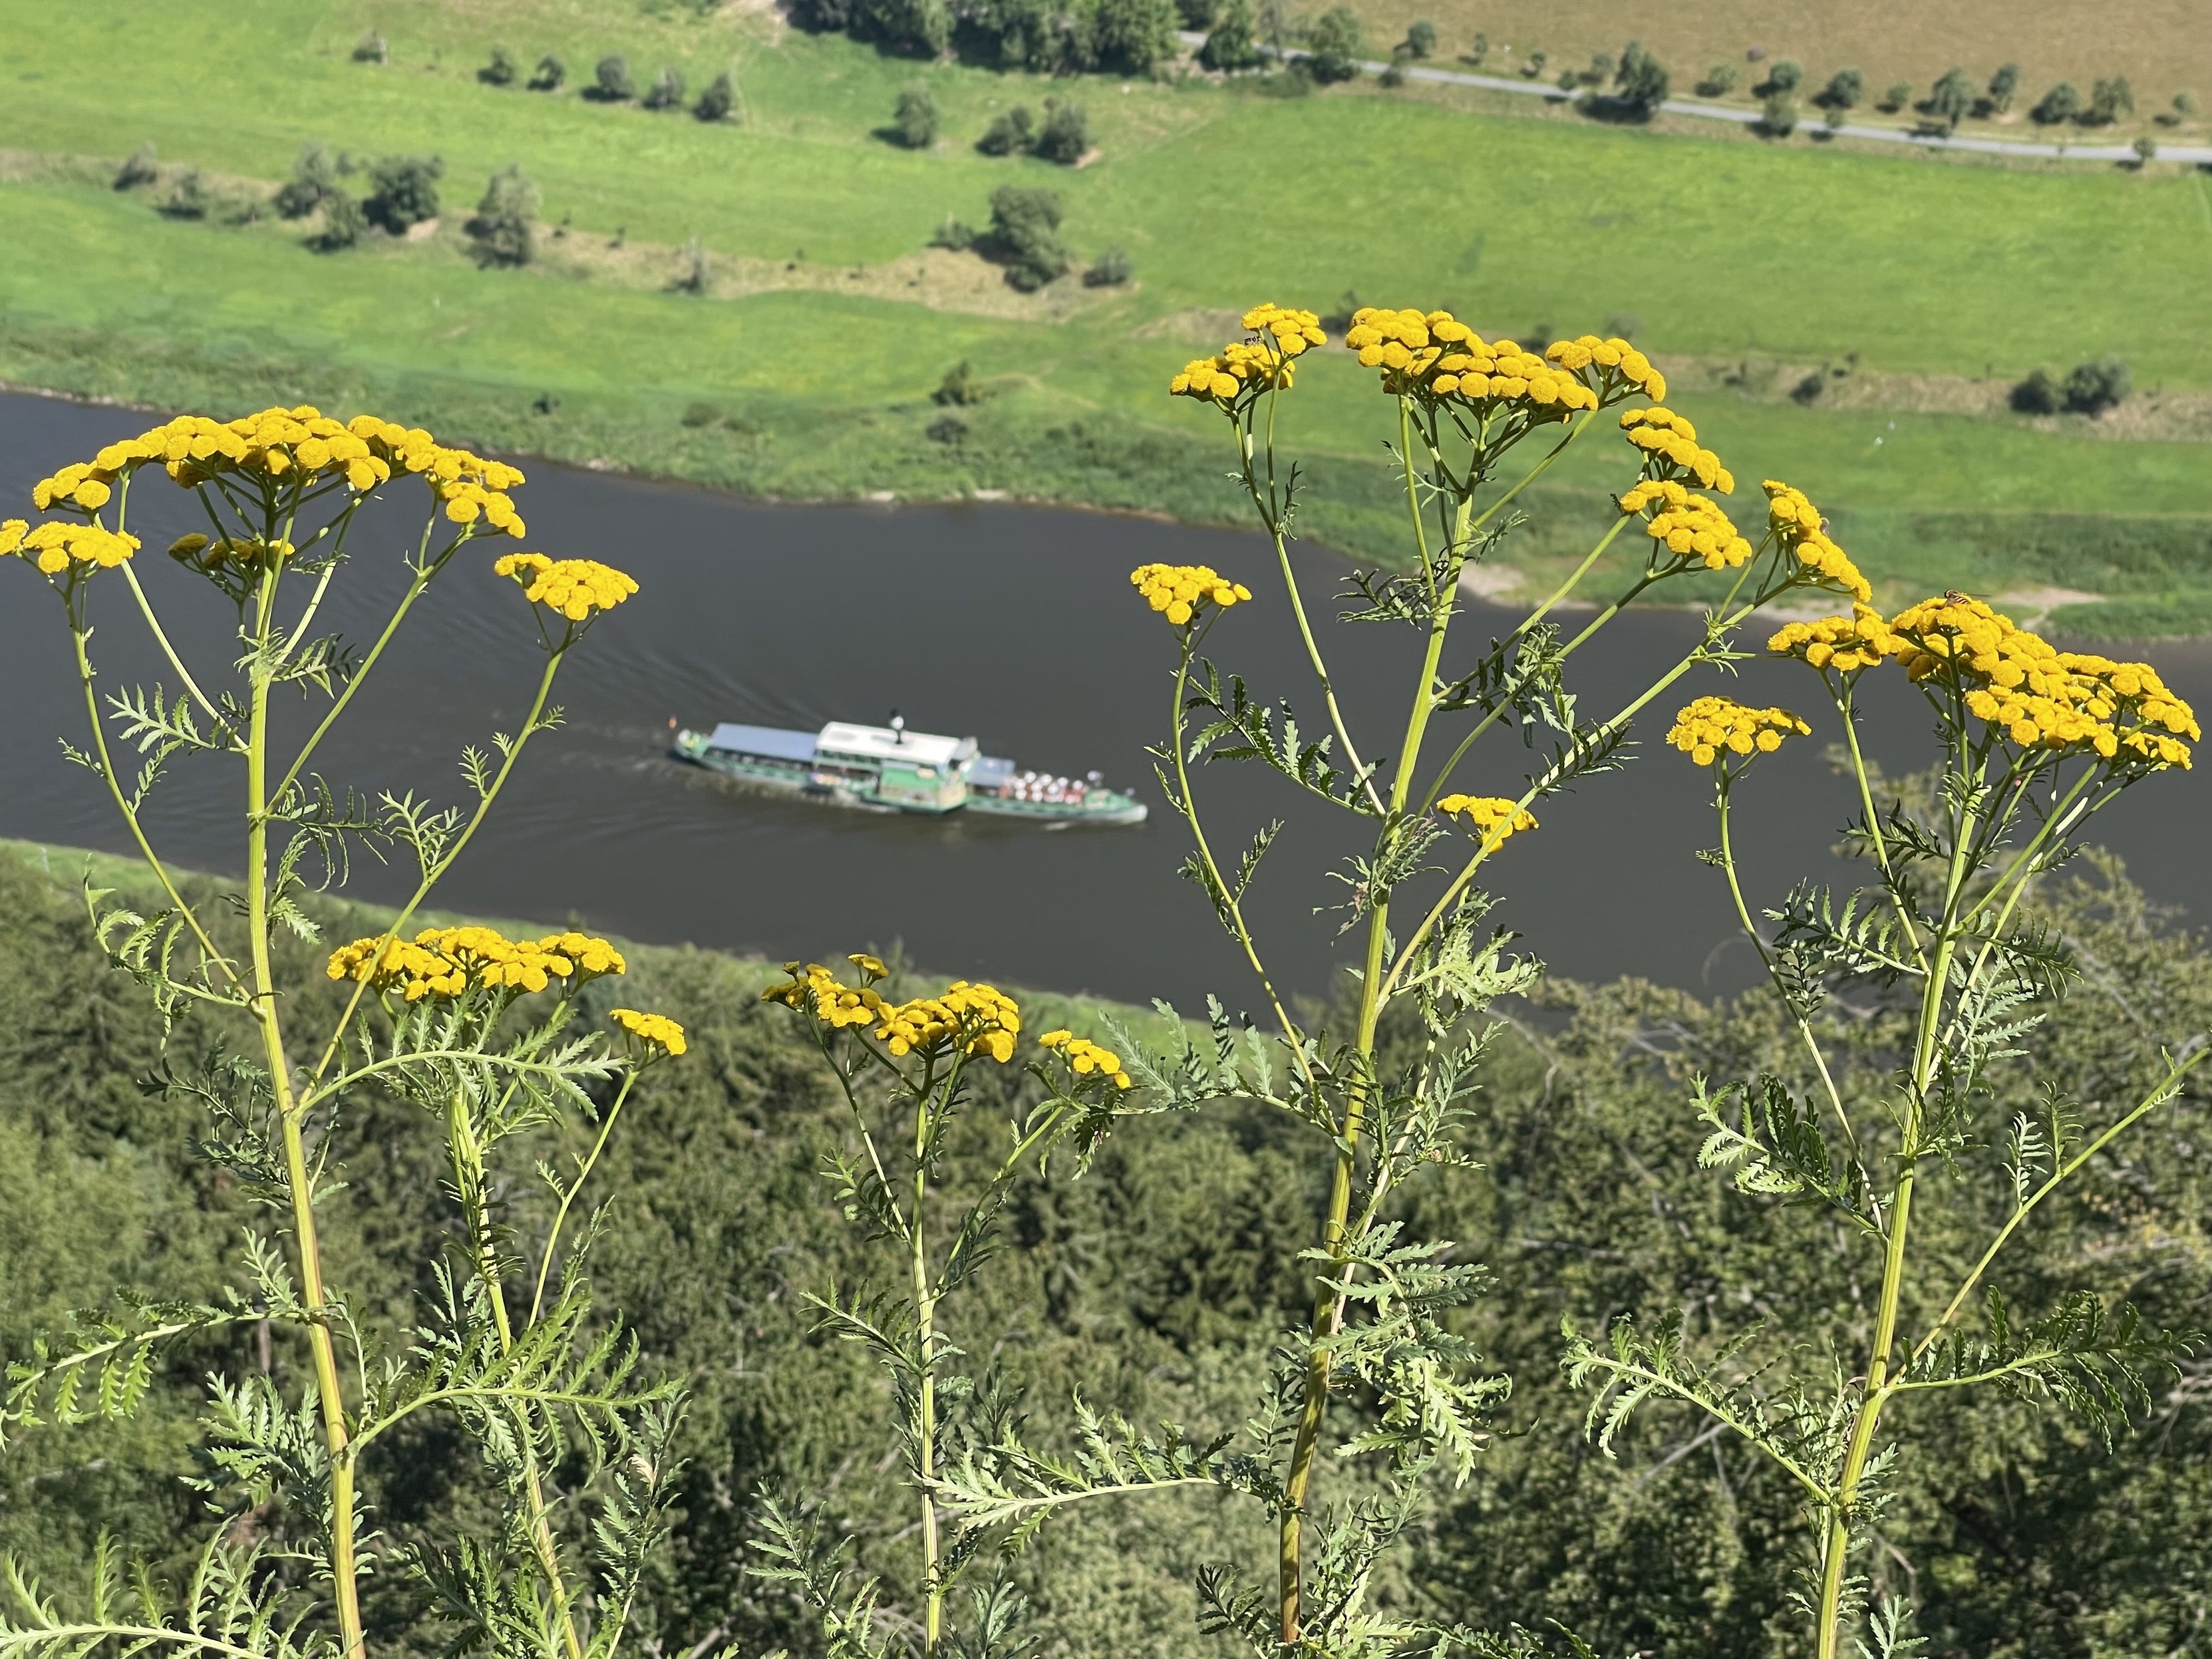 Yellow flowers in the foreground with a river and a boat, surrounded by green fields, in the background.